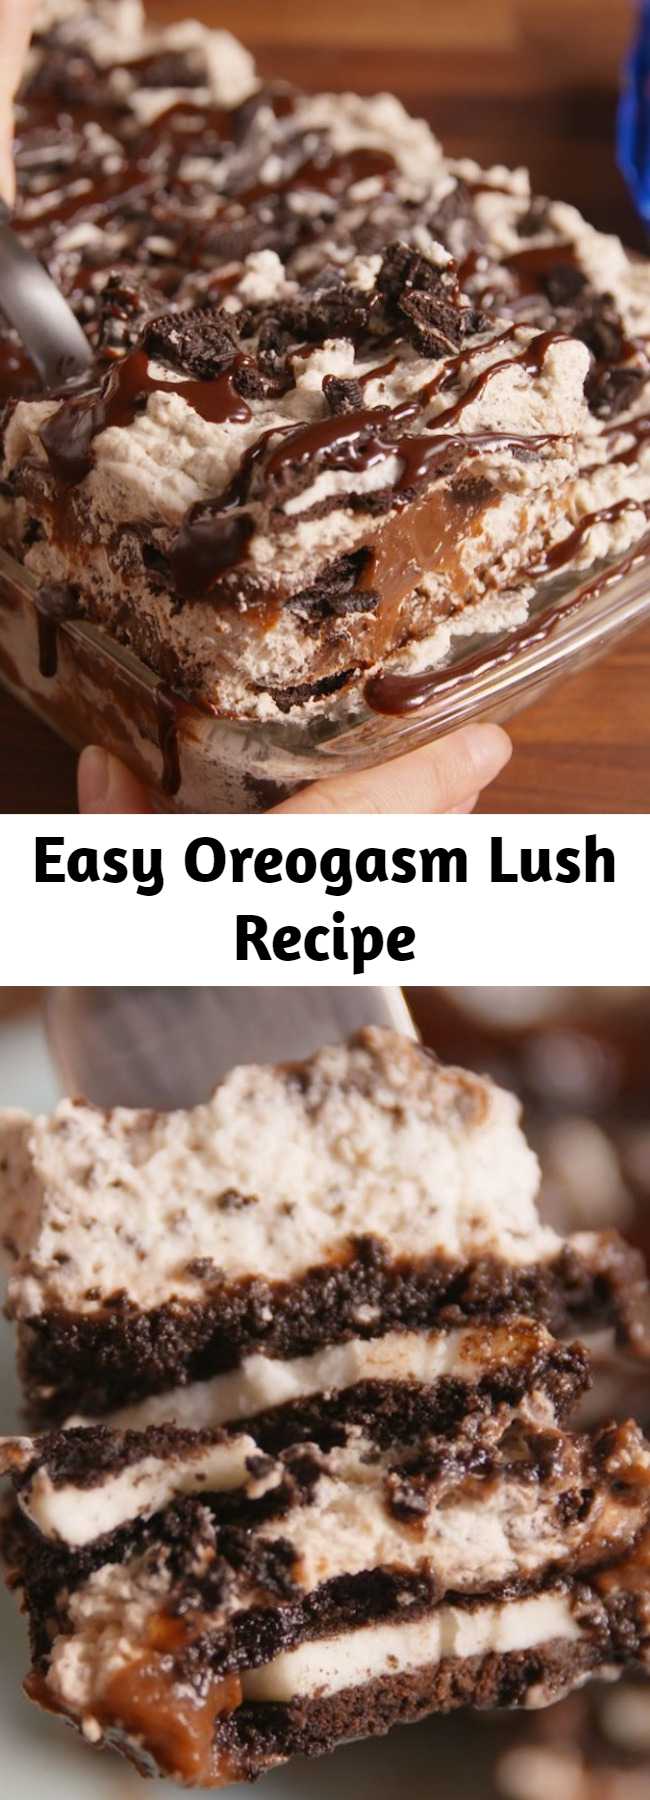 Easy Oreogasm Lush Recipe - This layered dessert "lasagna" is heaven for Oreo lovers. Oreogasm Lush Sounds Sexual, Tastes Incredible. Prepare yourself for the joys of Oreo whipped cream.